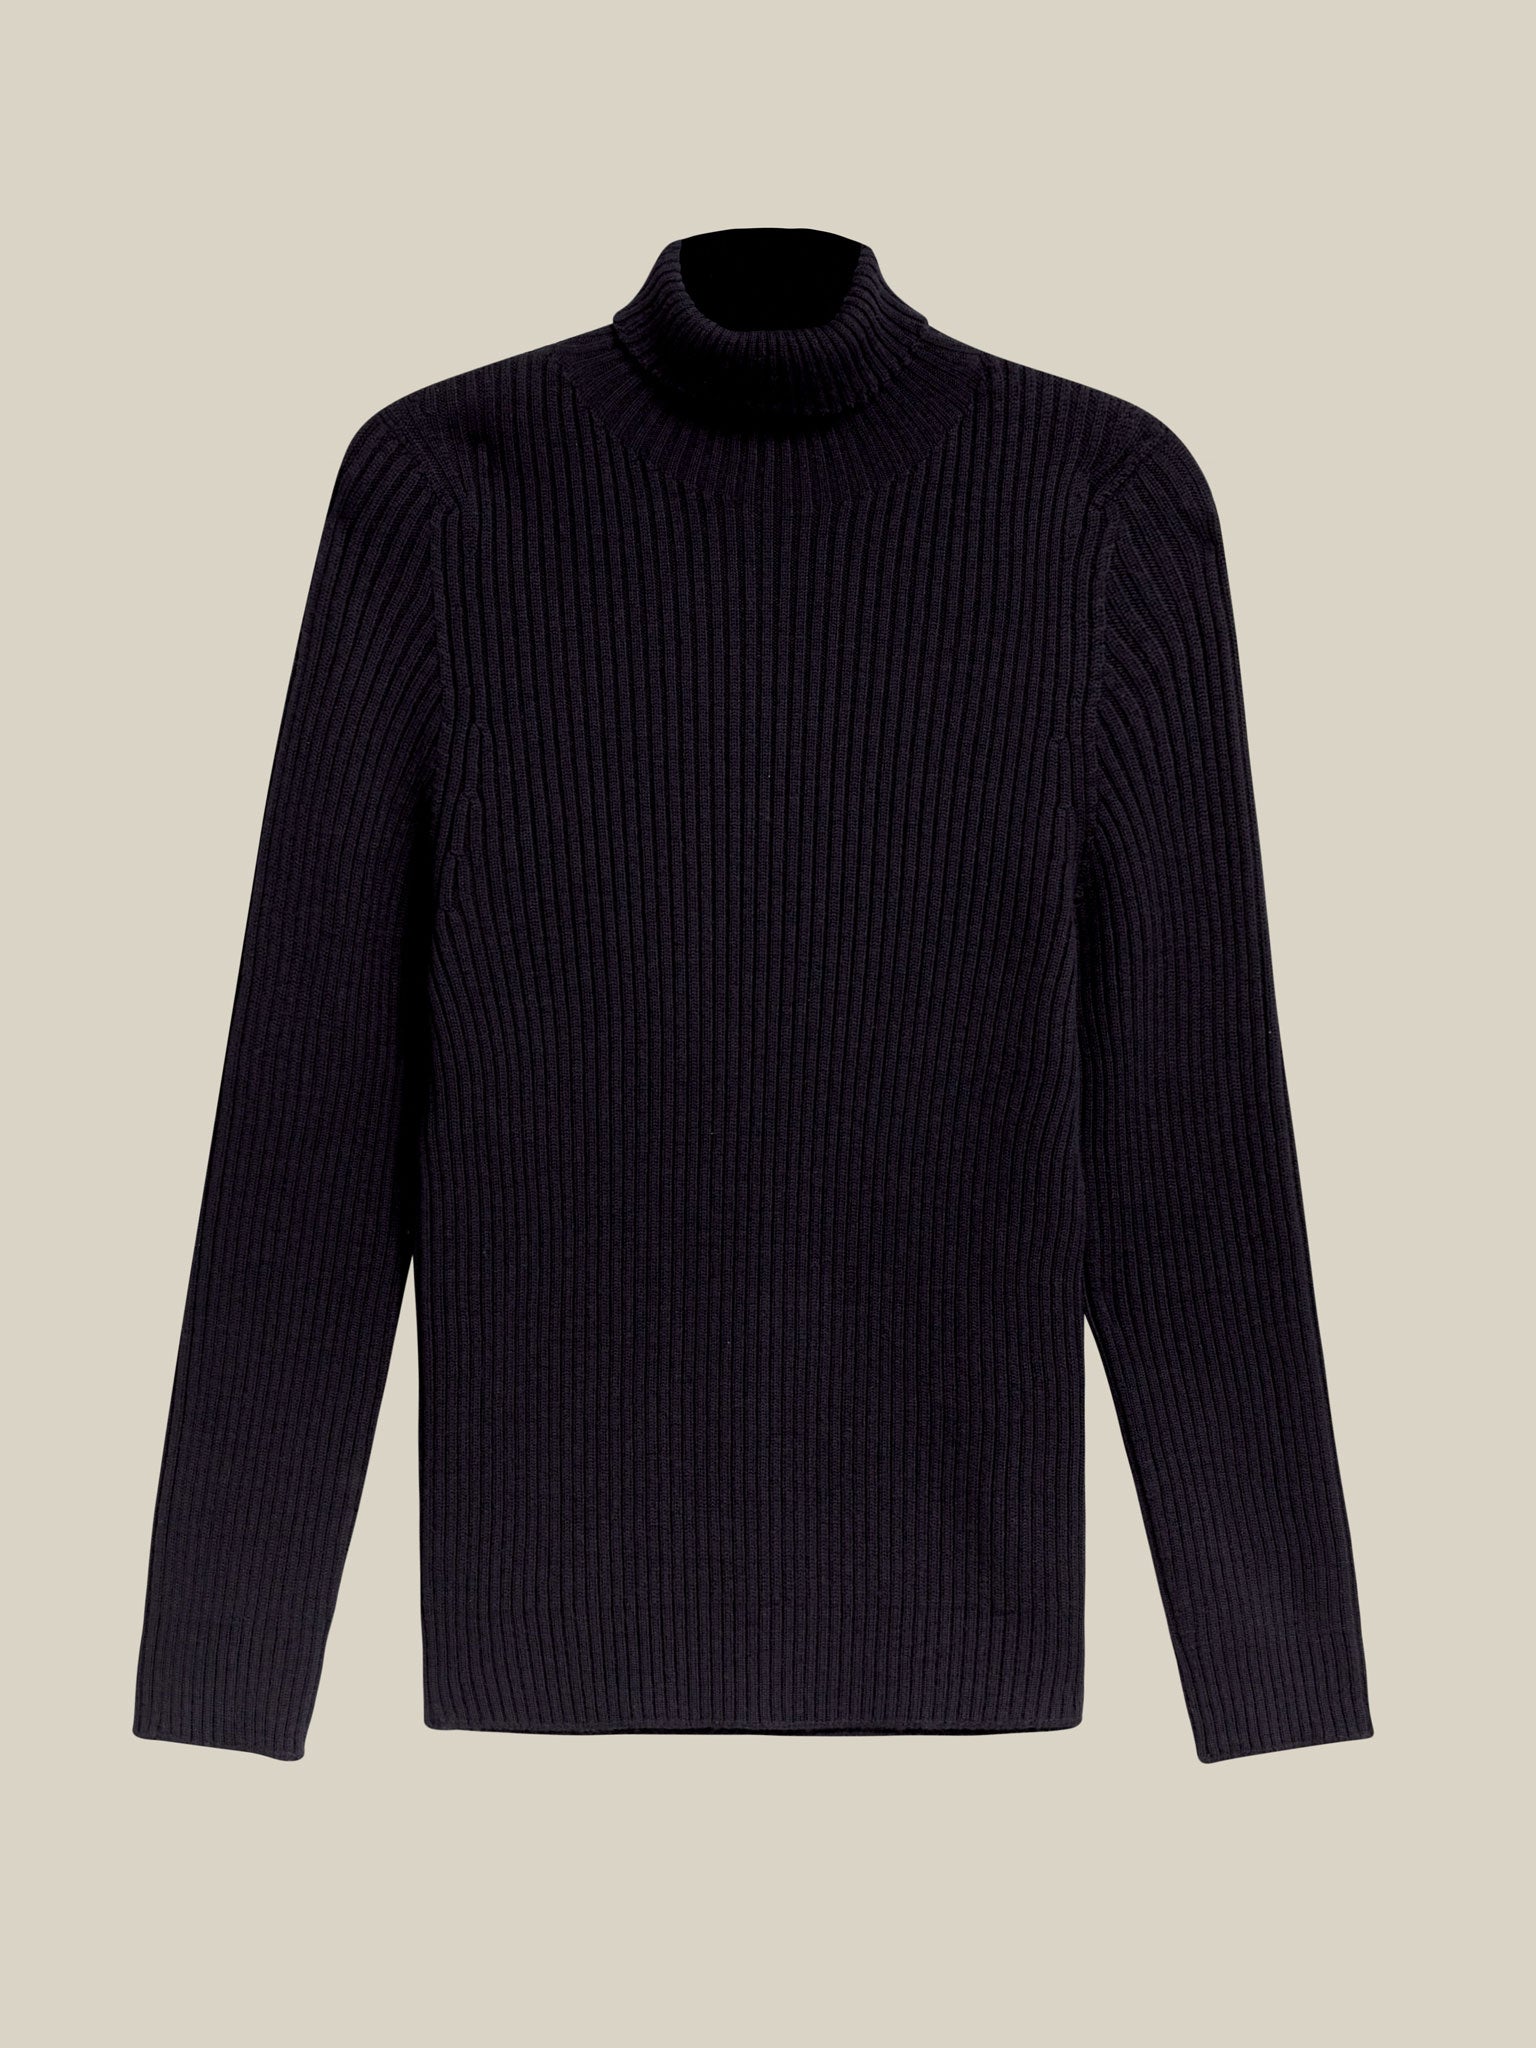 Blue knit mens roll neck sweater, a perfect alternative to a shirt and tie